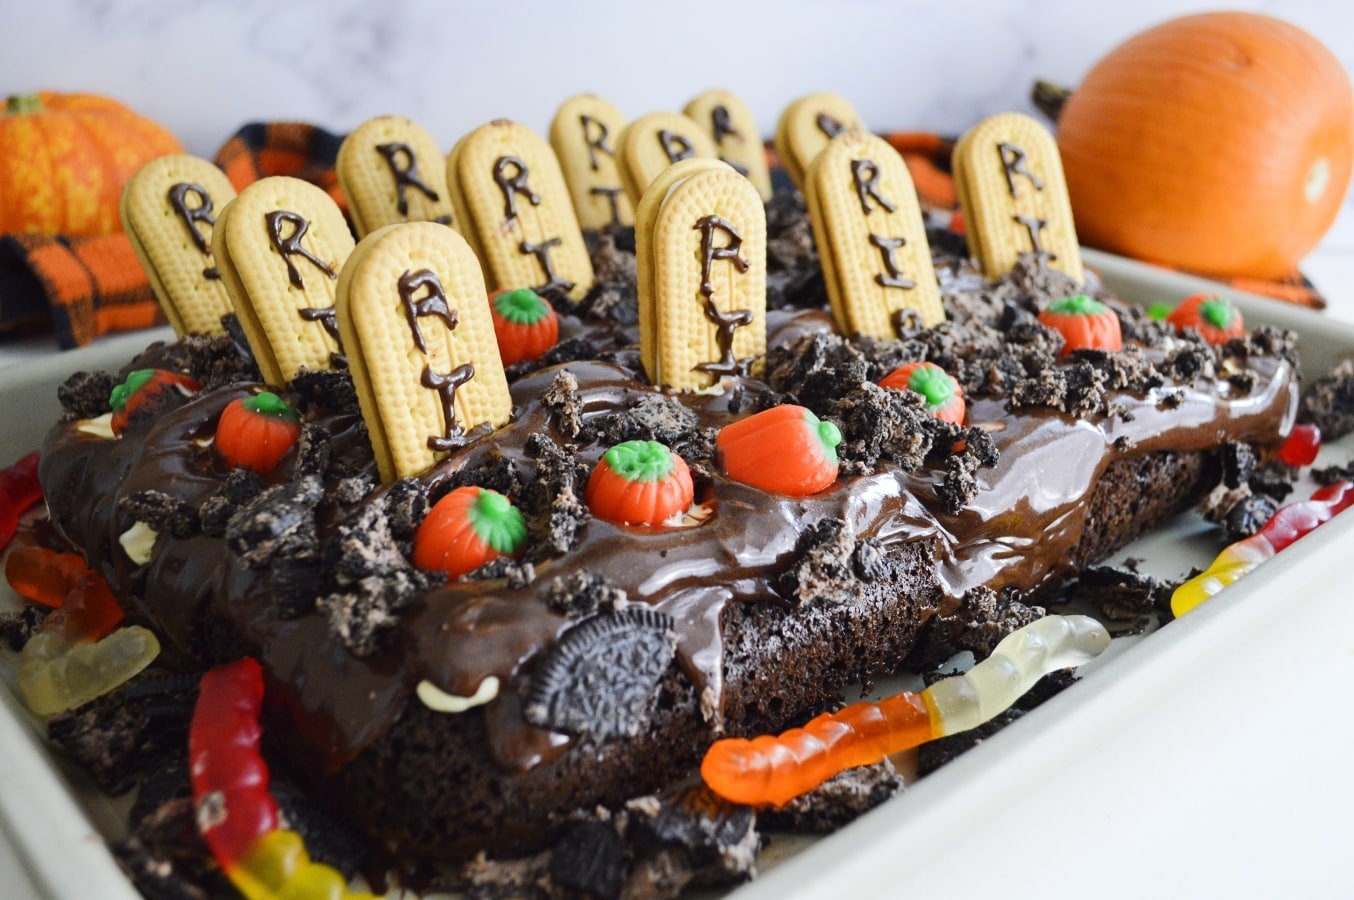 A graveyard cake decorated with candy pumpkins and biscuit gravestones.